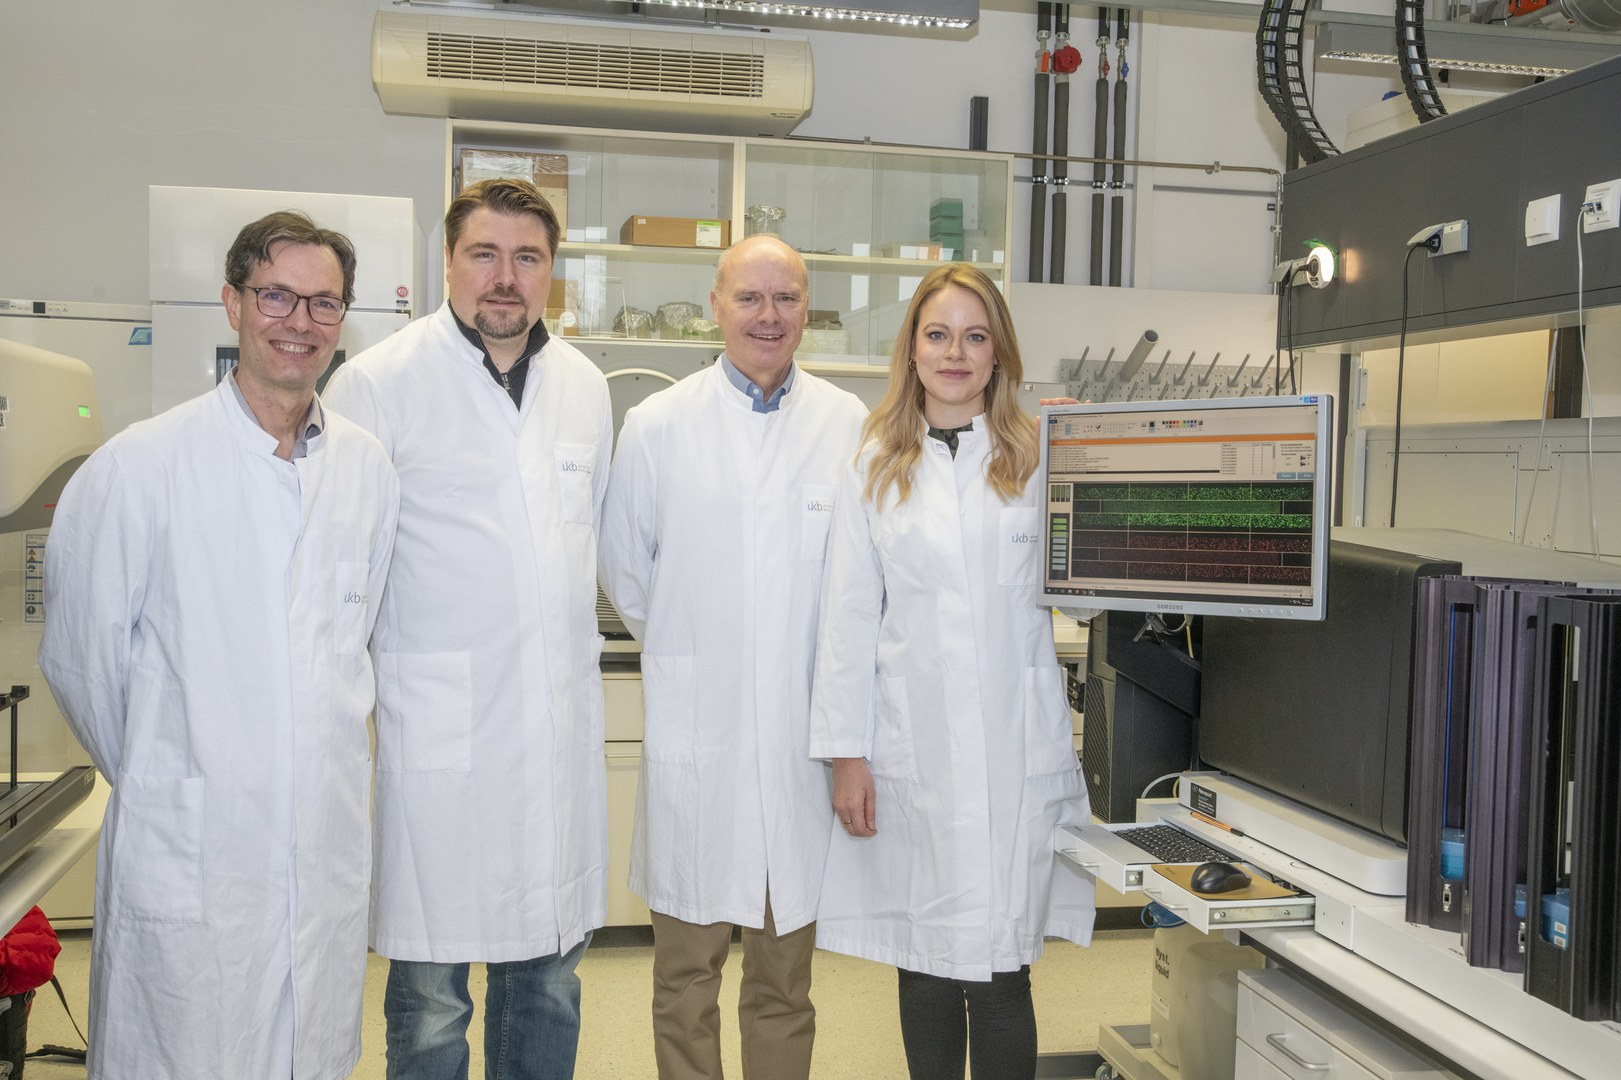 Bonn researchers identify new risk locus in the genome for ACE inhibitor-induced angioedema: - (from left) Prof. Bernhardt Sachs from the BfArM and Prof. Andreas Forstner, Prof. Markus Nöthen and Carina Mathey from the Institute of Human Genetics of the UKB and the University of Bonn.